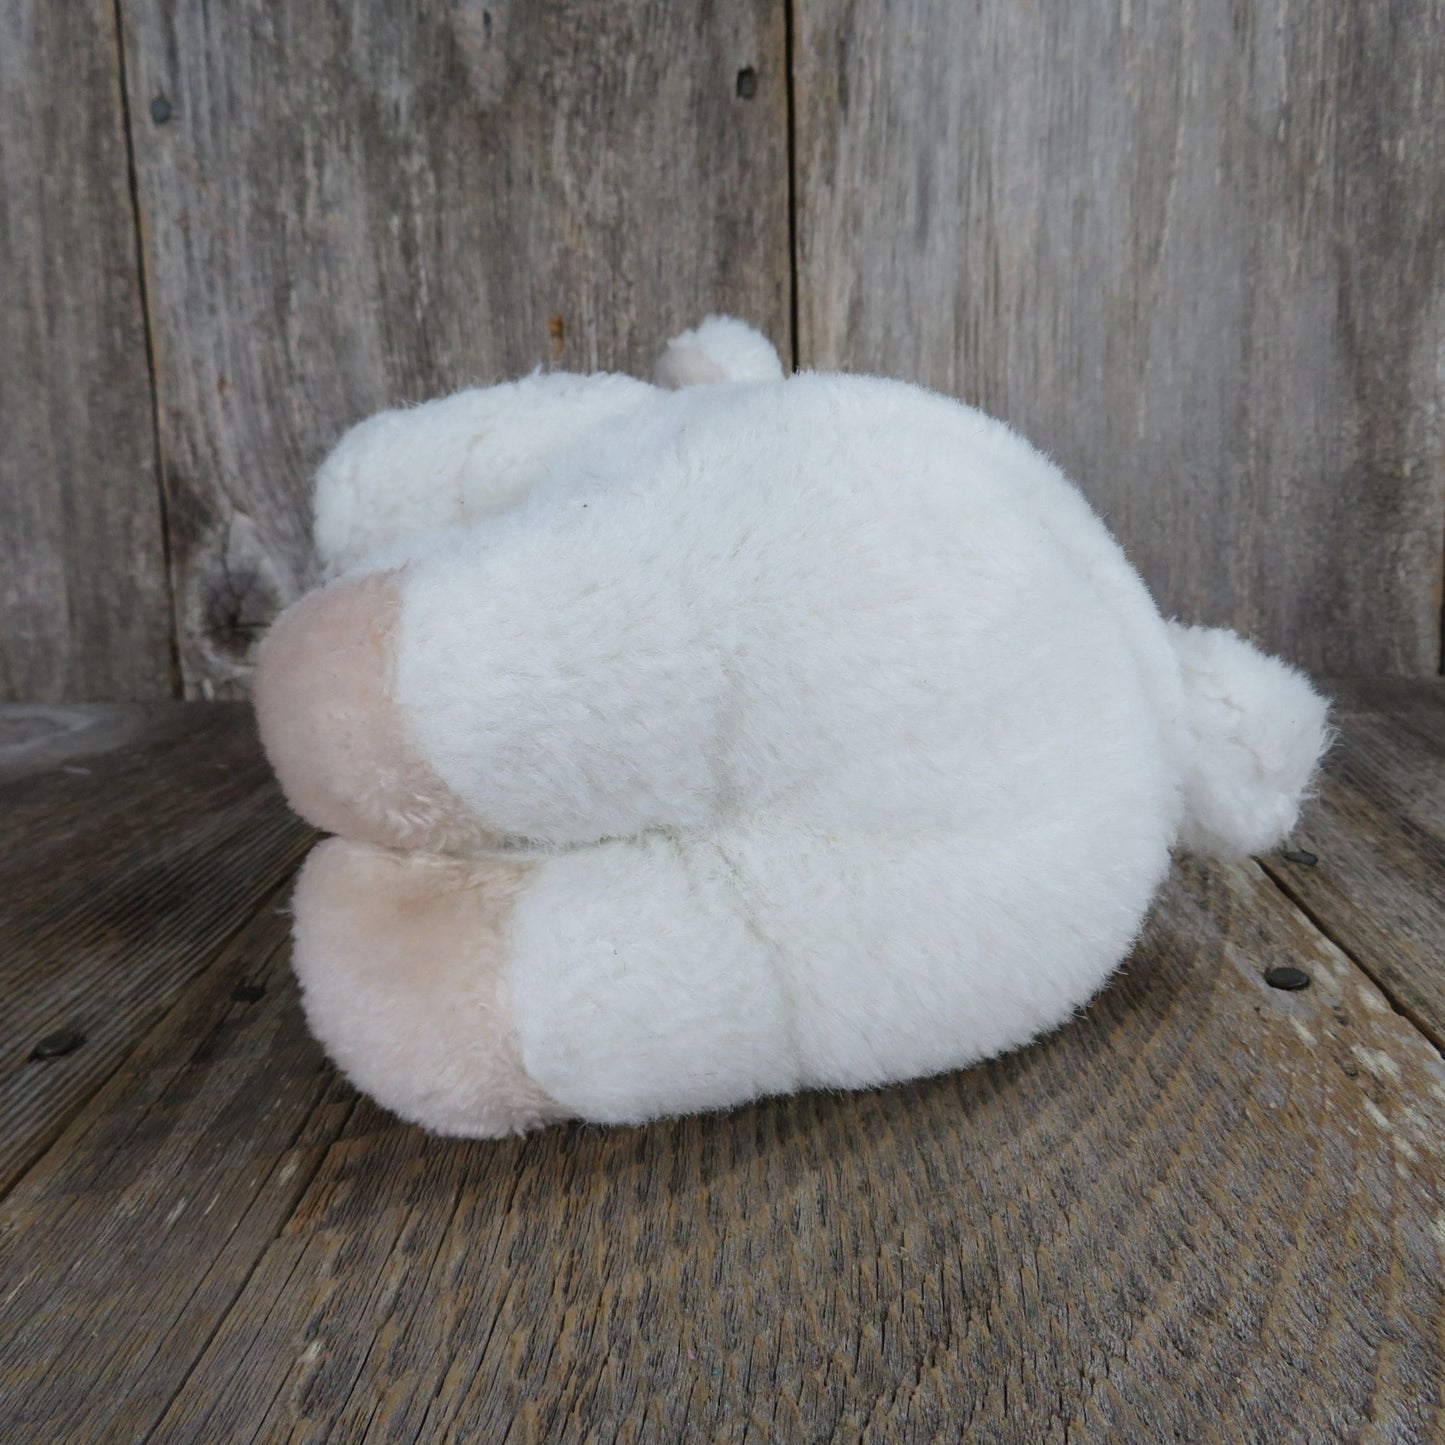 Teddy Bear Plush Sitting with Brown Plastic Nose White Body Tan Feet and Ears